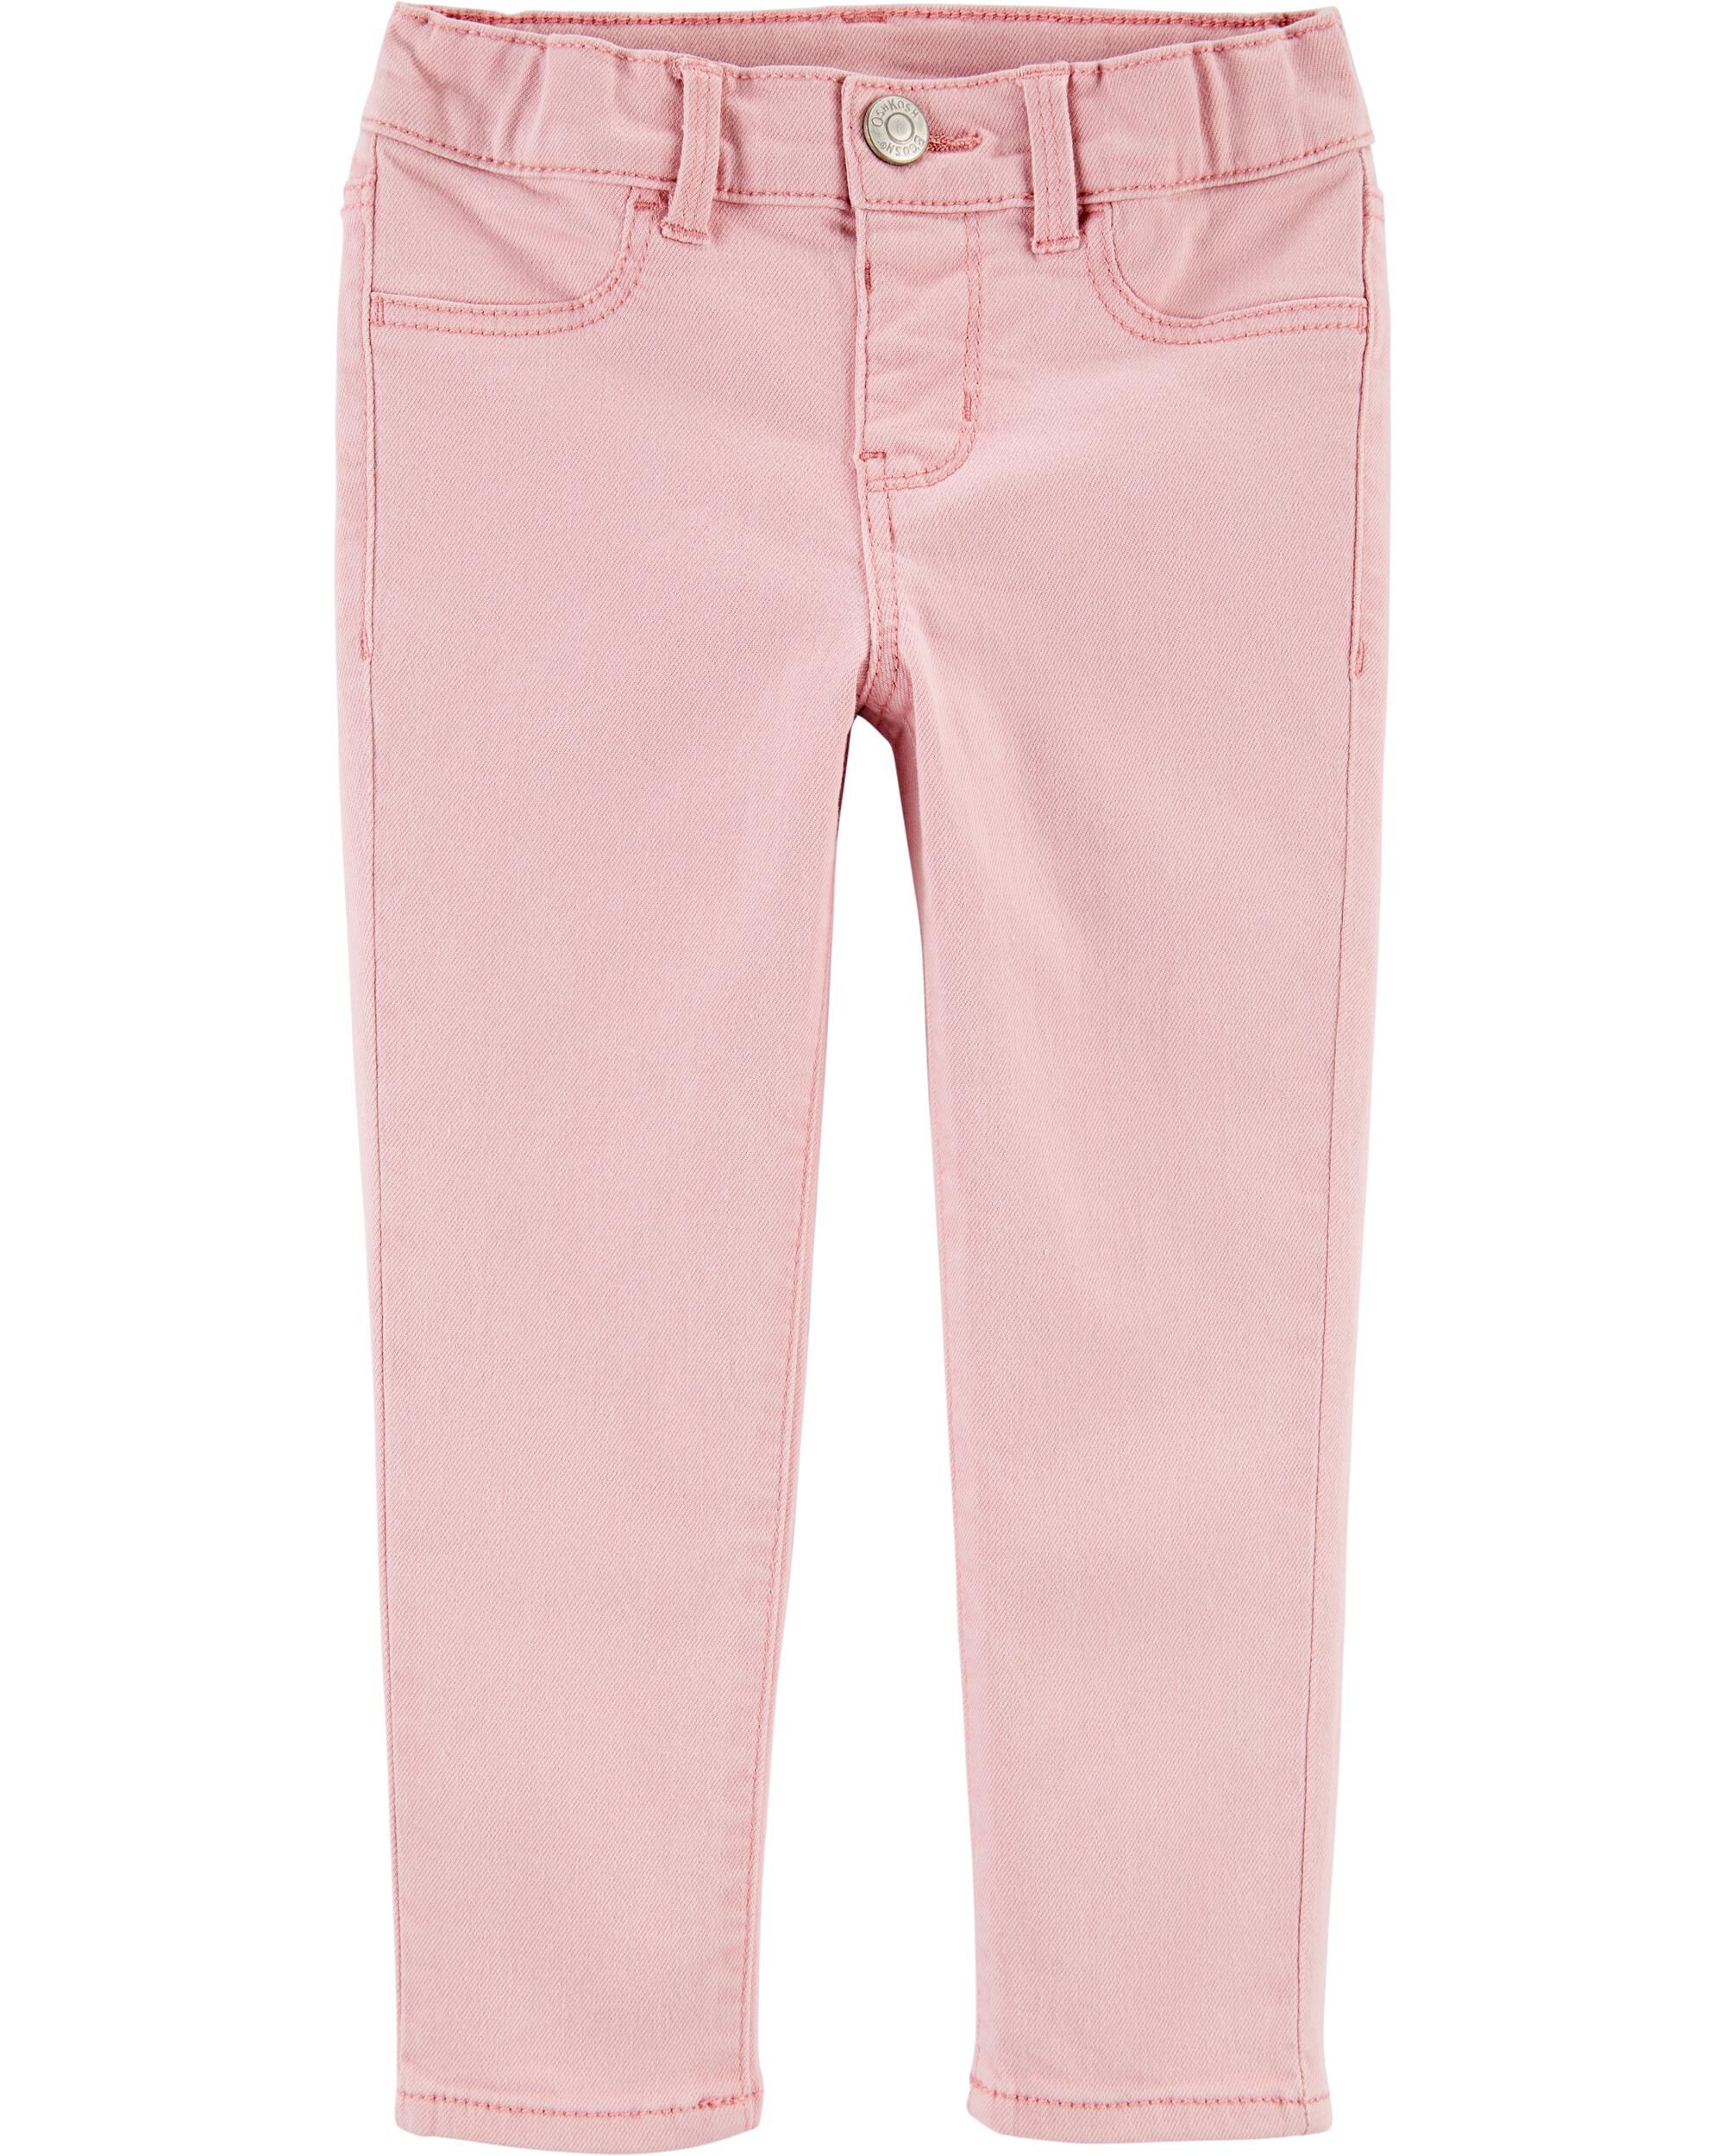 rose colored jeggings